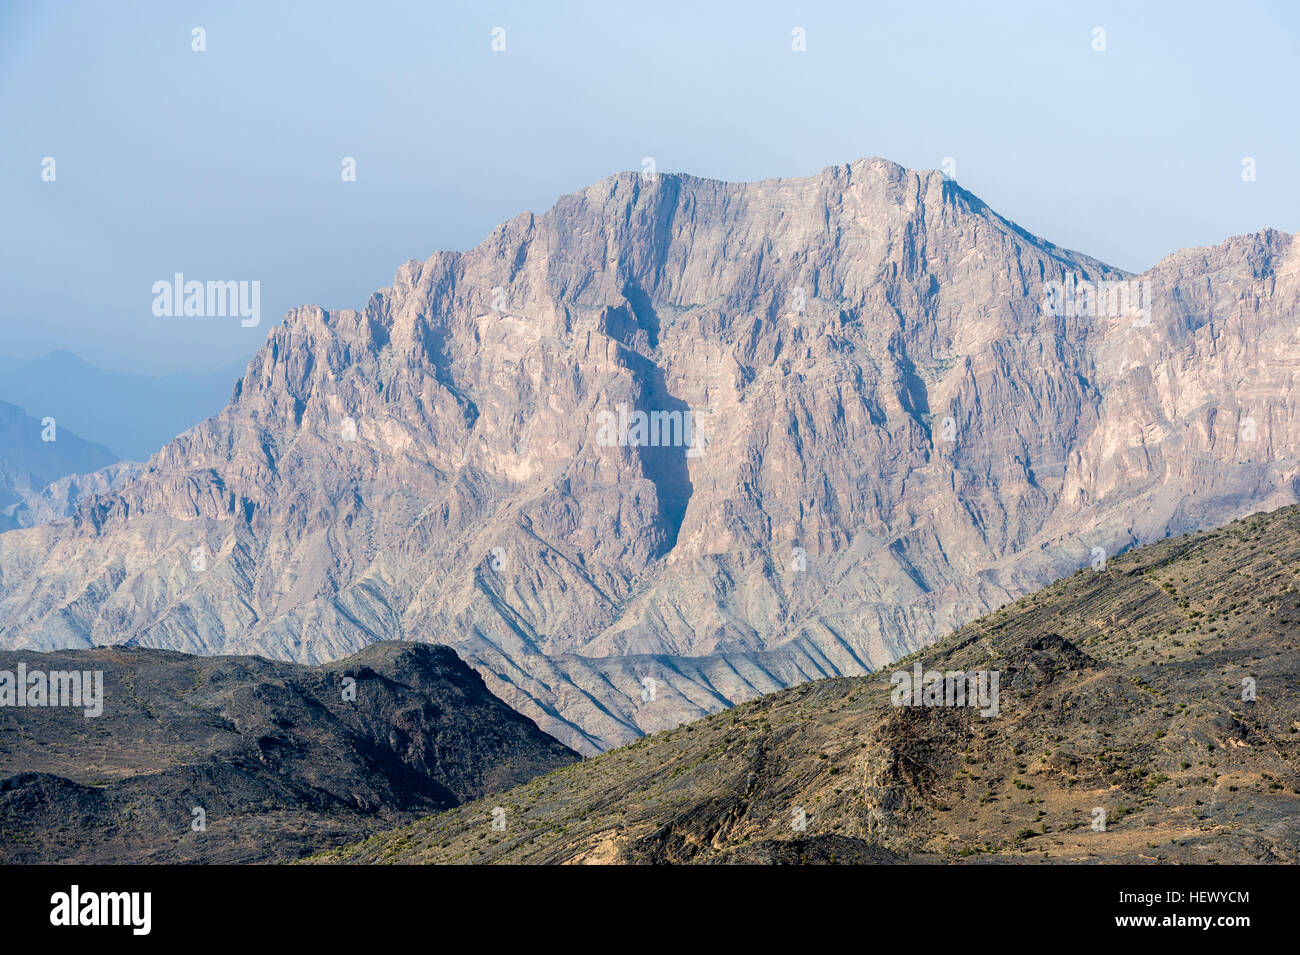 The steep slopes of arid jagged mountains overlooking an eroded and inhospitable rocky desert valley. Stock Photo